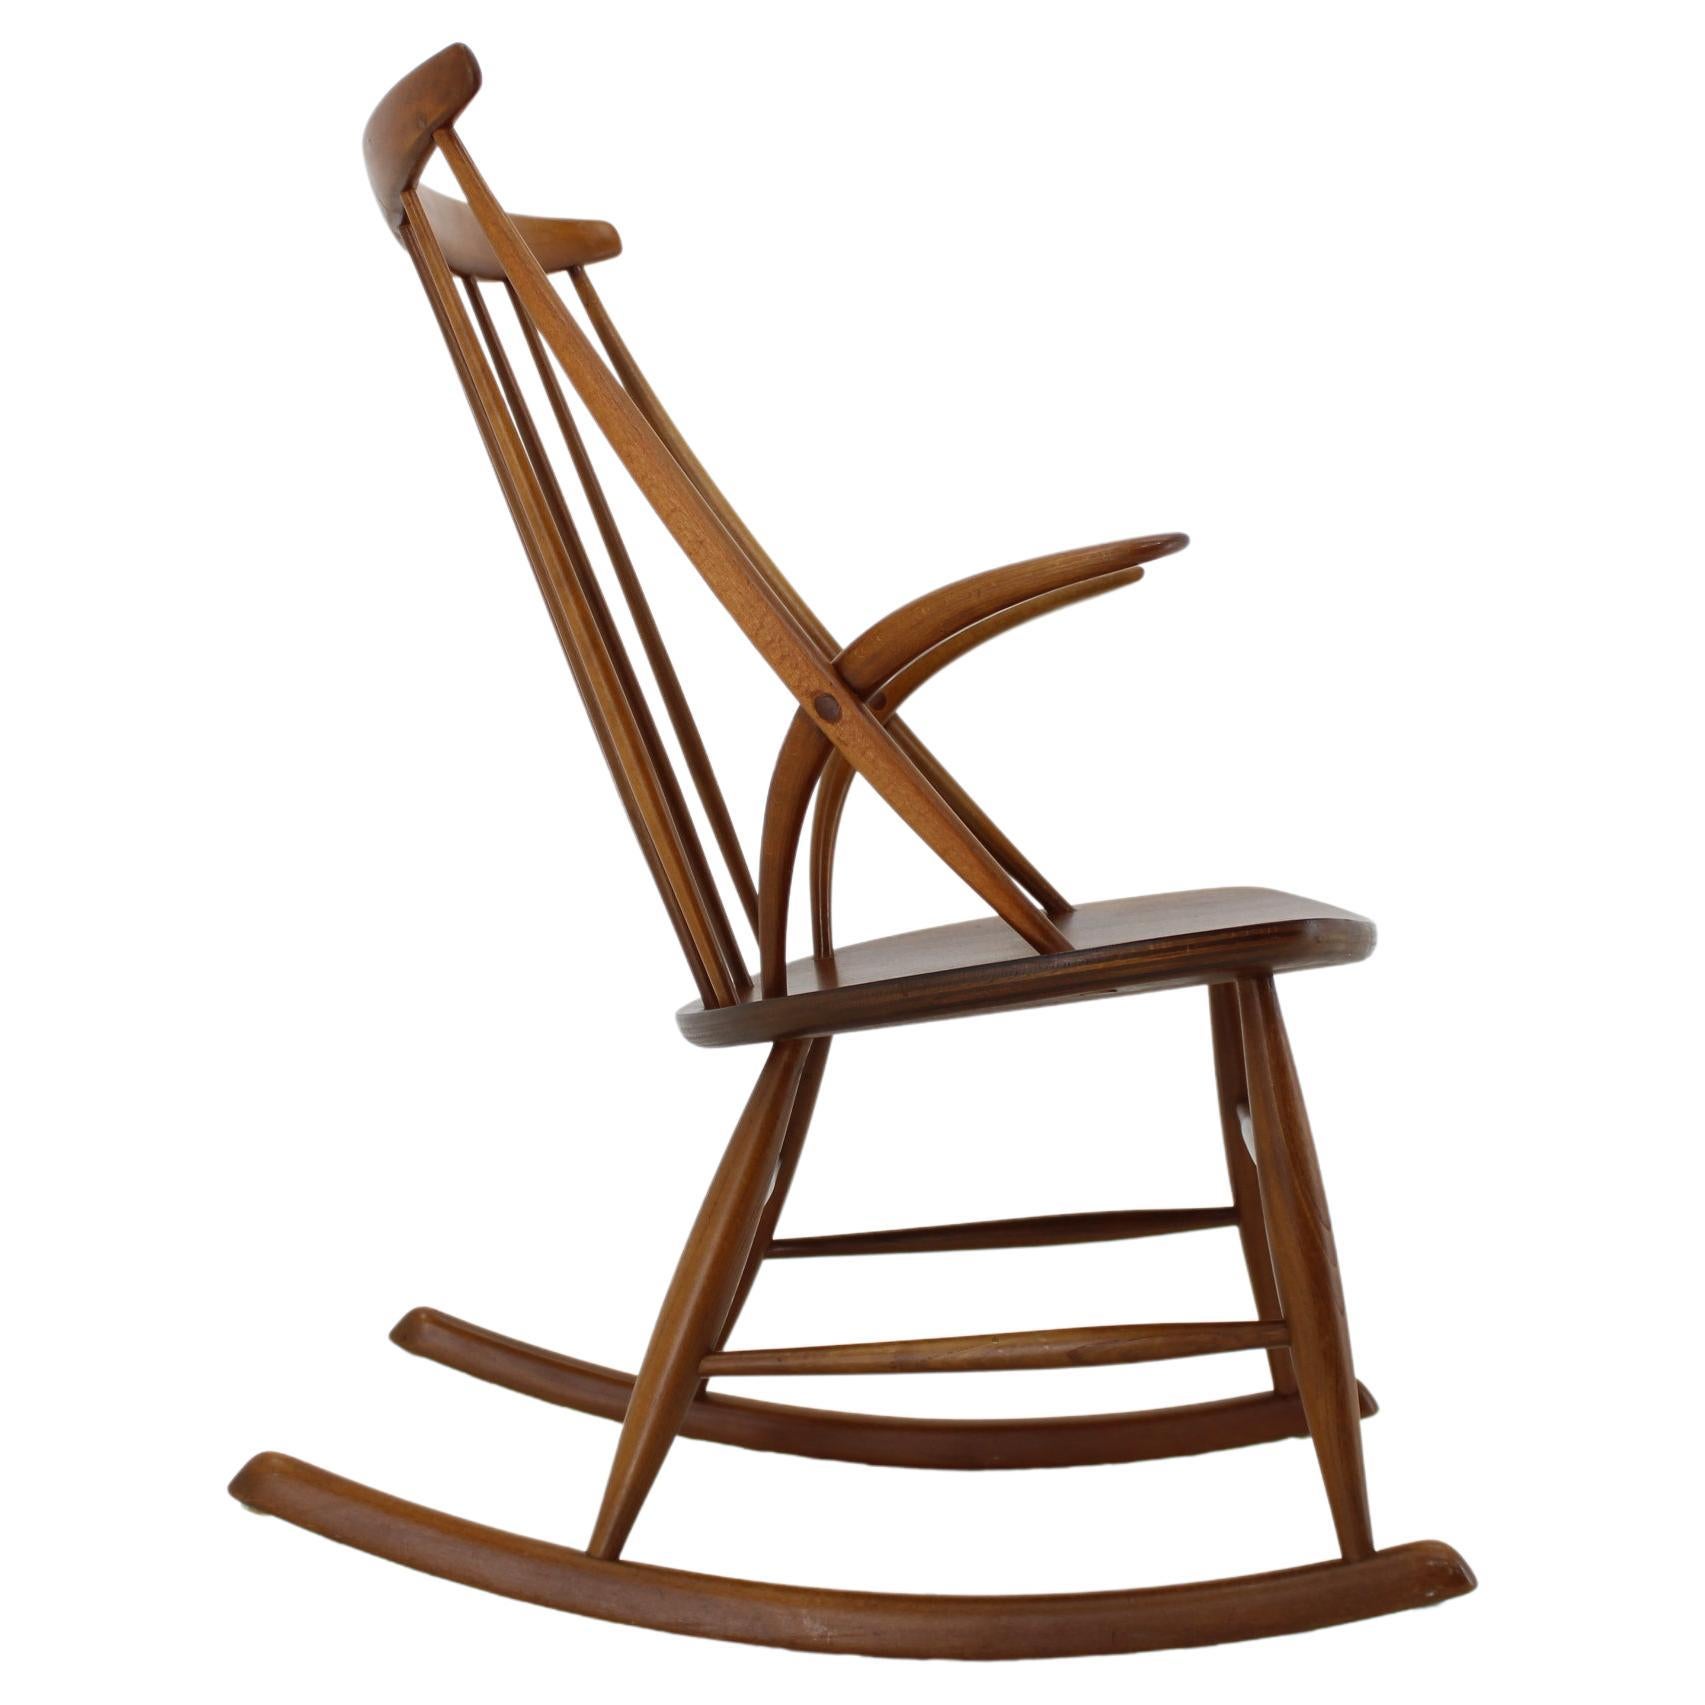 1960s Illum Wikkelso Gyngestol No. 3 Rocking Chair for Niels Eilersen, 2 items a For Sale